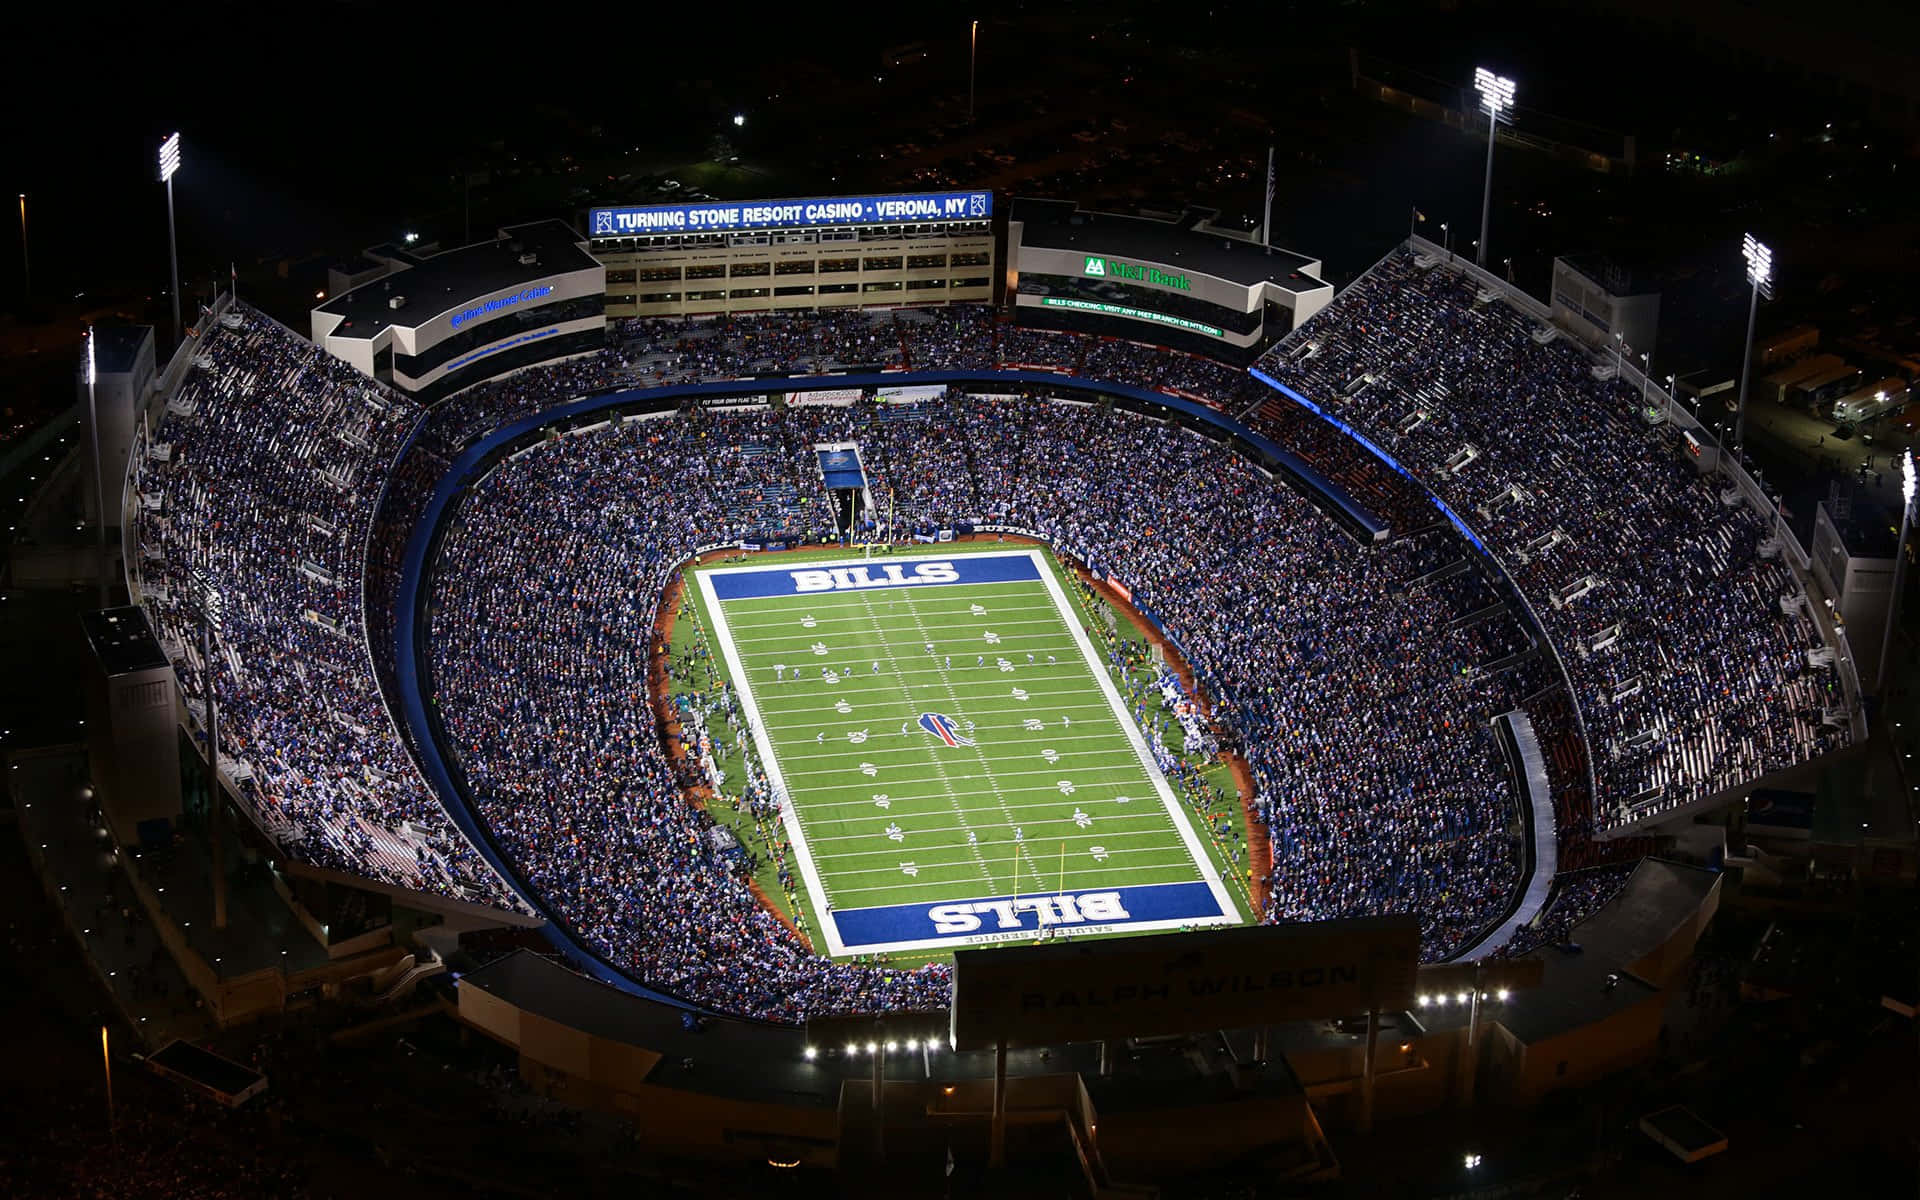 Thousands of football fans cheer inside a bright and vibrant football stadium.